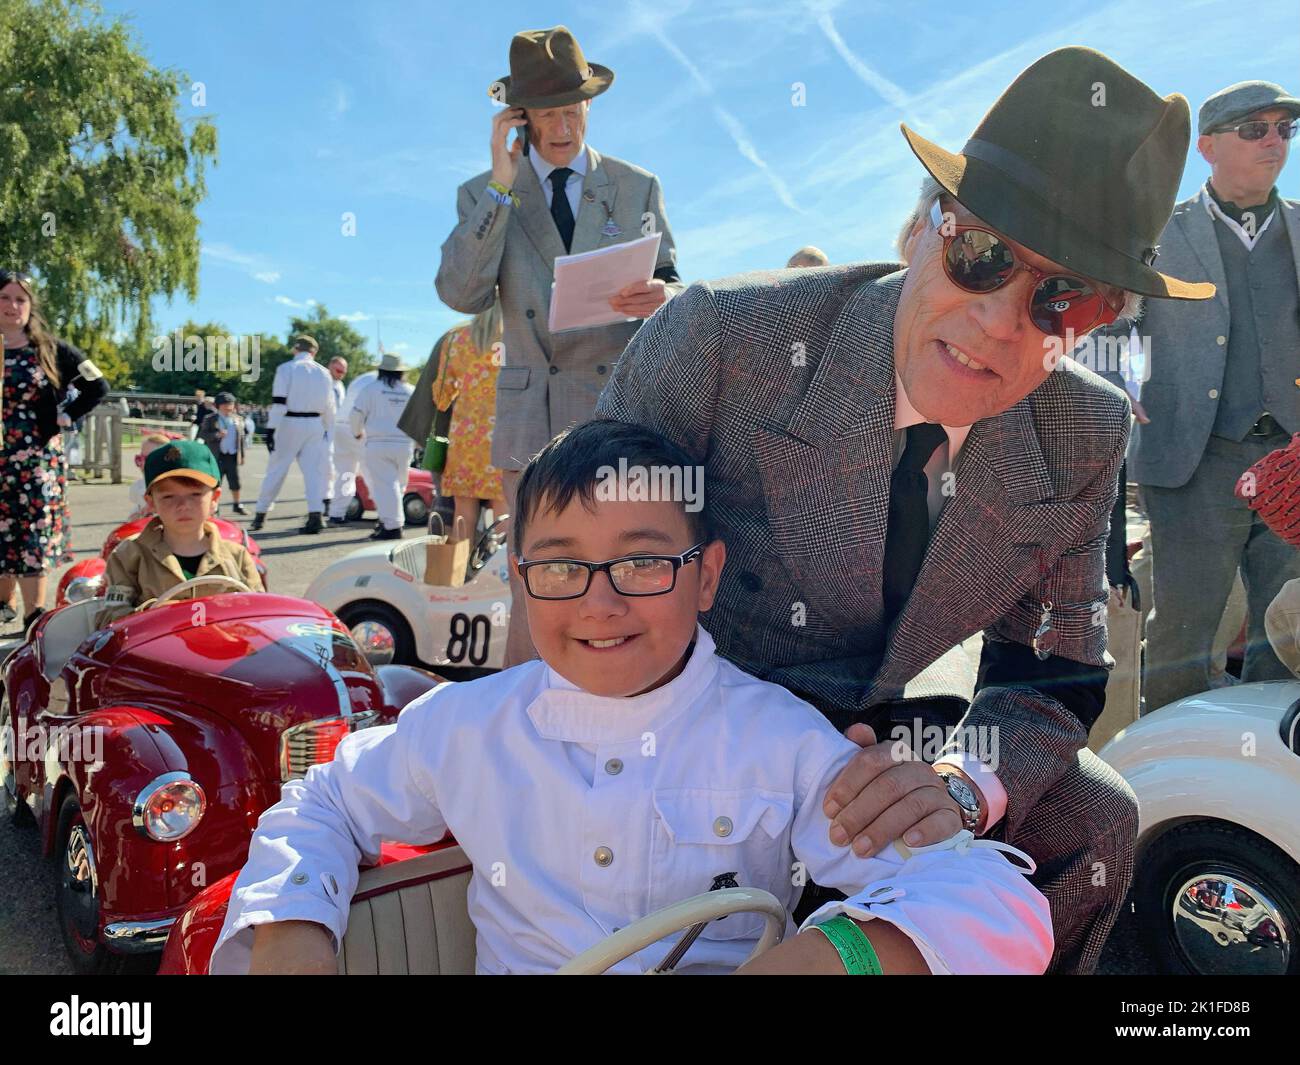 Goodwood, West Sussex, UK. 18th September 2022. His Grace the Duke of Richmond and Gordon with Settrington Cup Austin J40 pedal car race driver Joshua Greig at the Goodwood Revival in Goodwood, West Sussex, UK. © Malcolm Greig/Alamy Live News Stock Photo